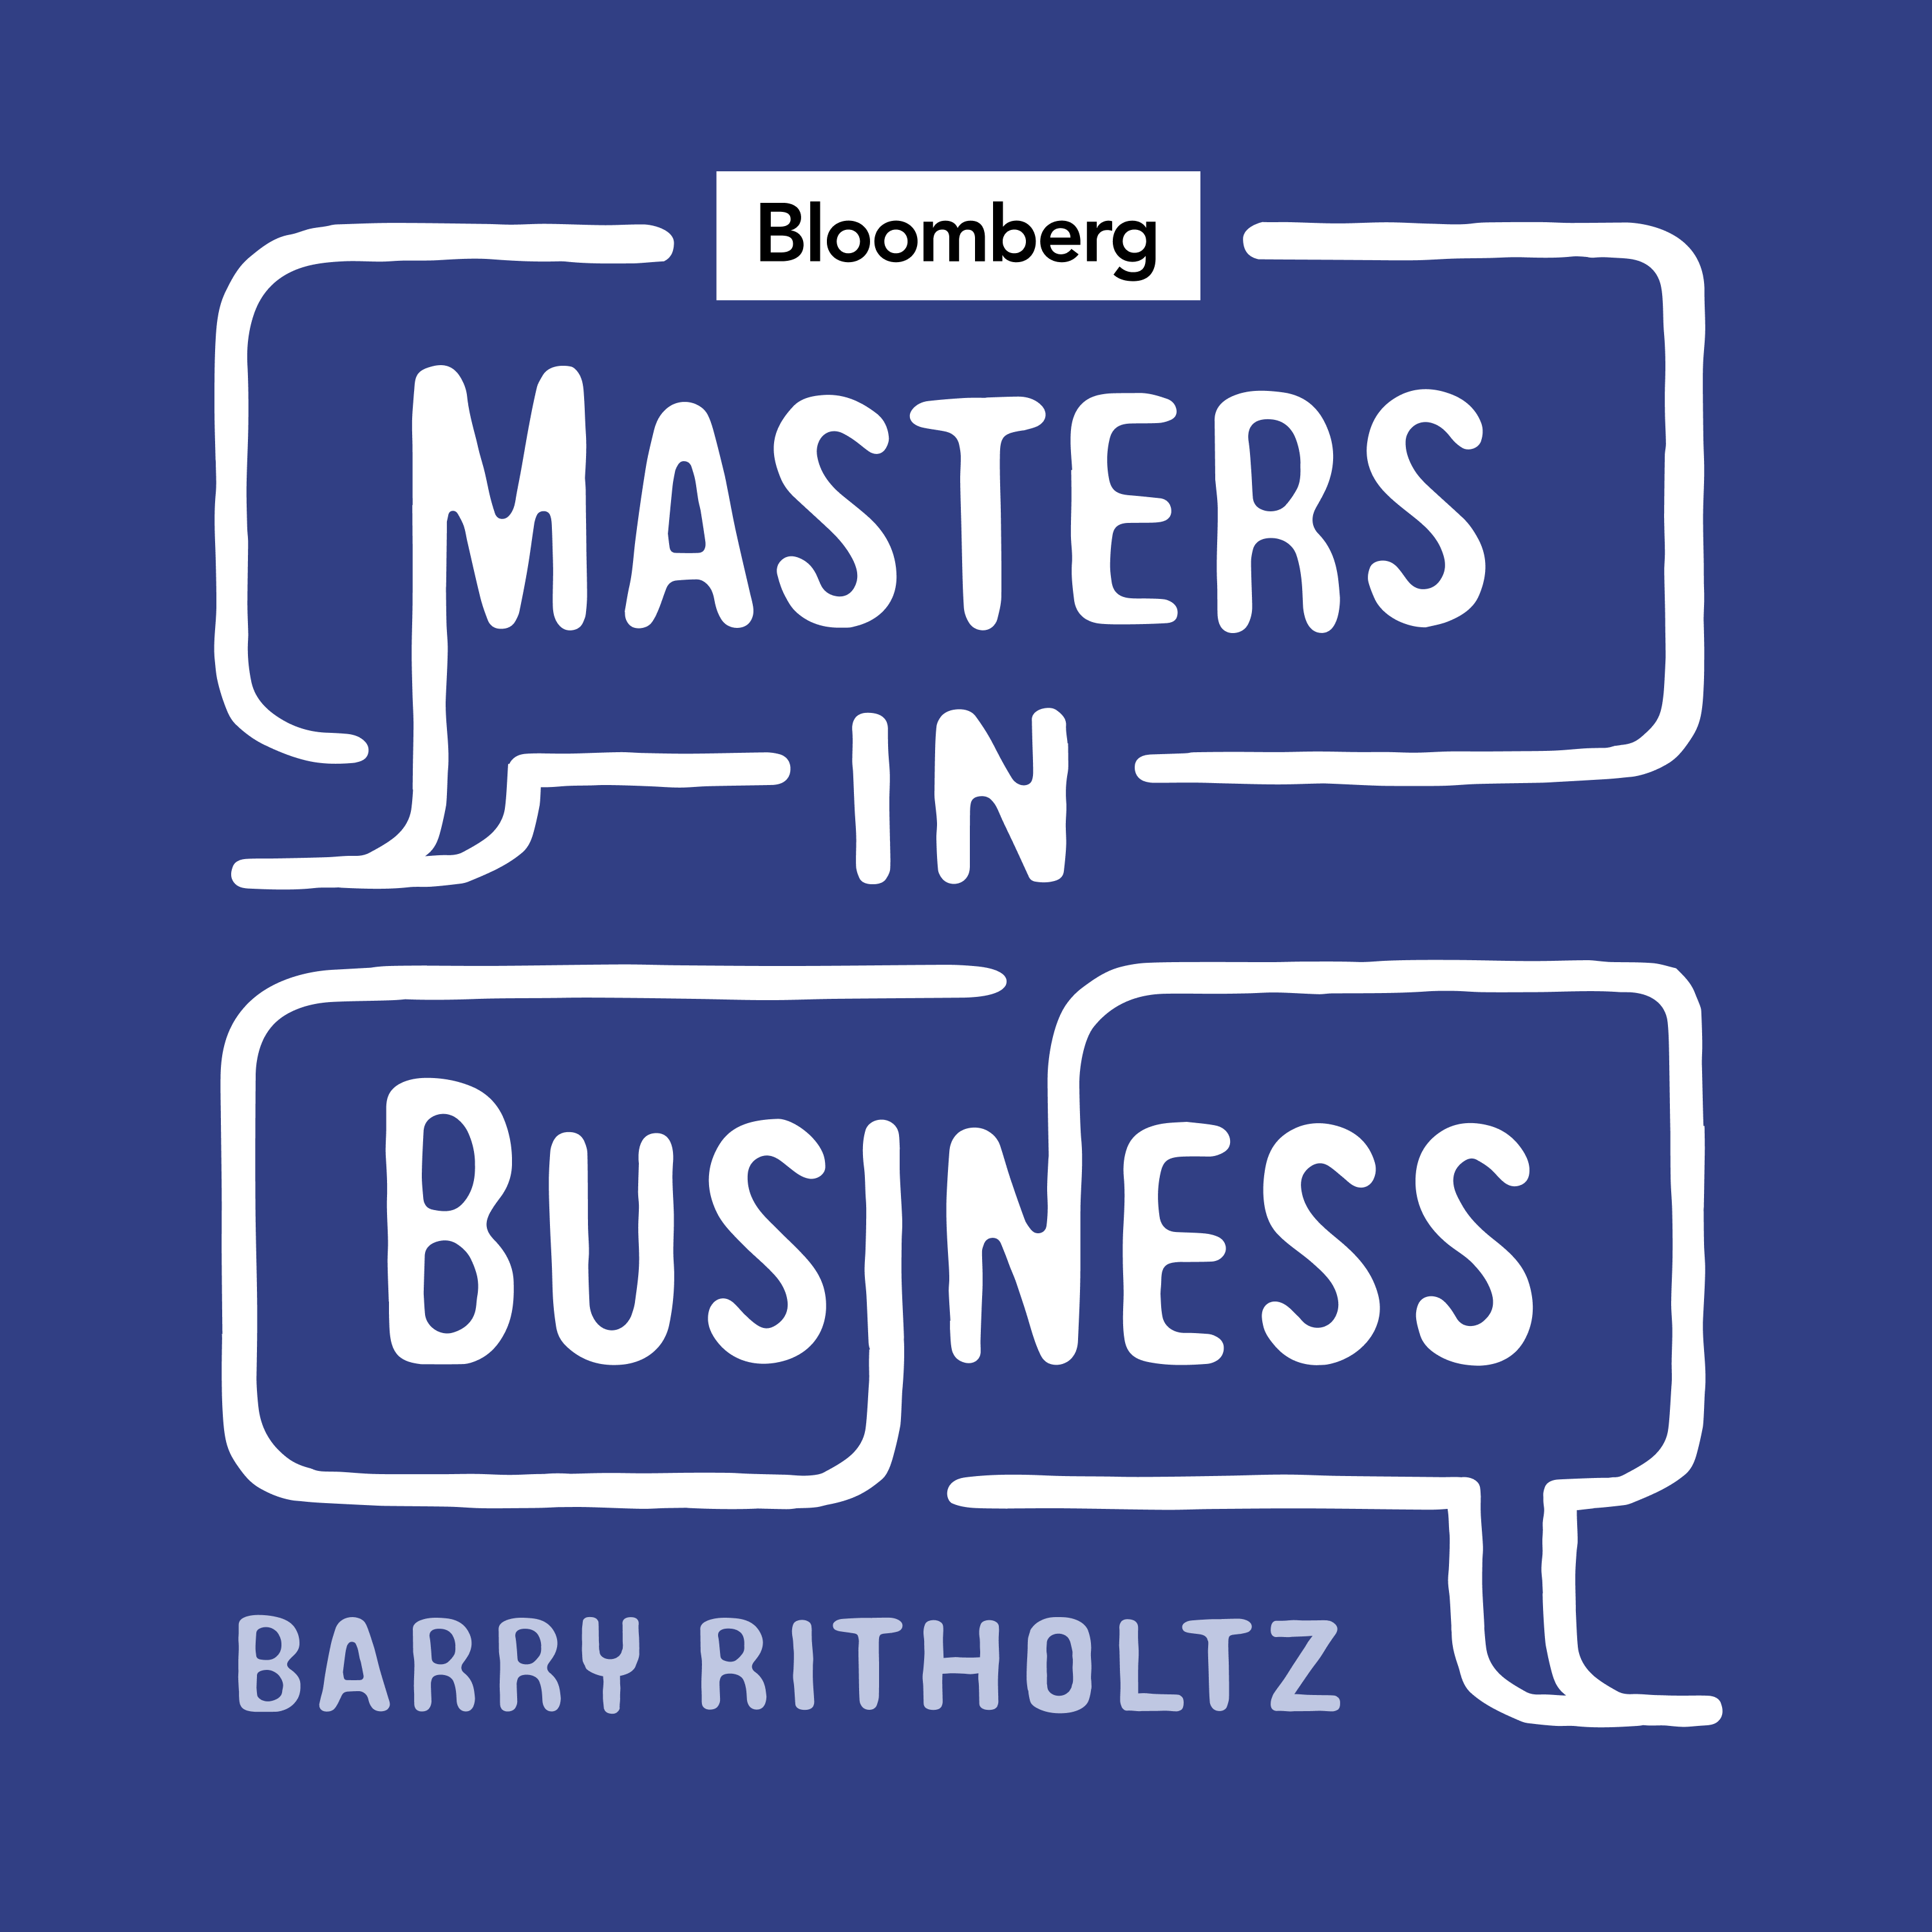 Hubert Joly on the Heart of Business (Podcast)